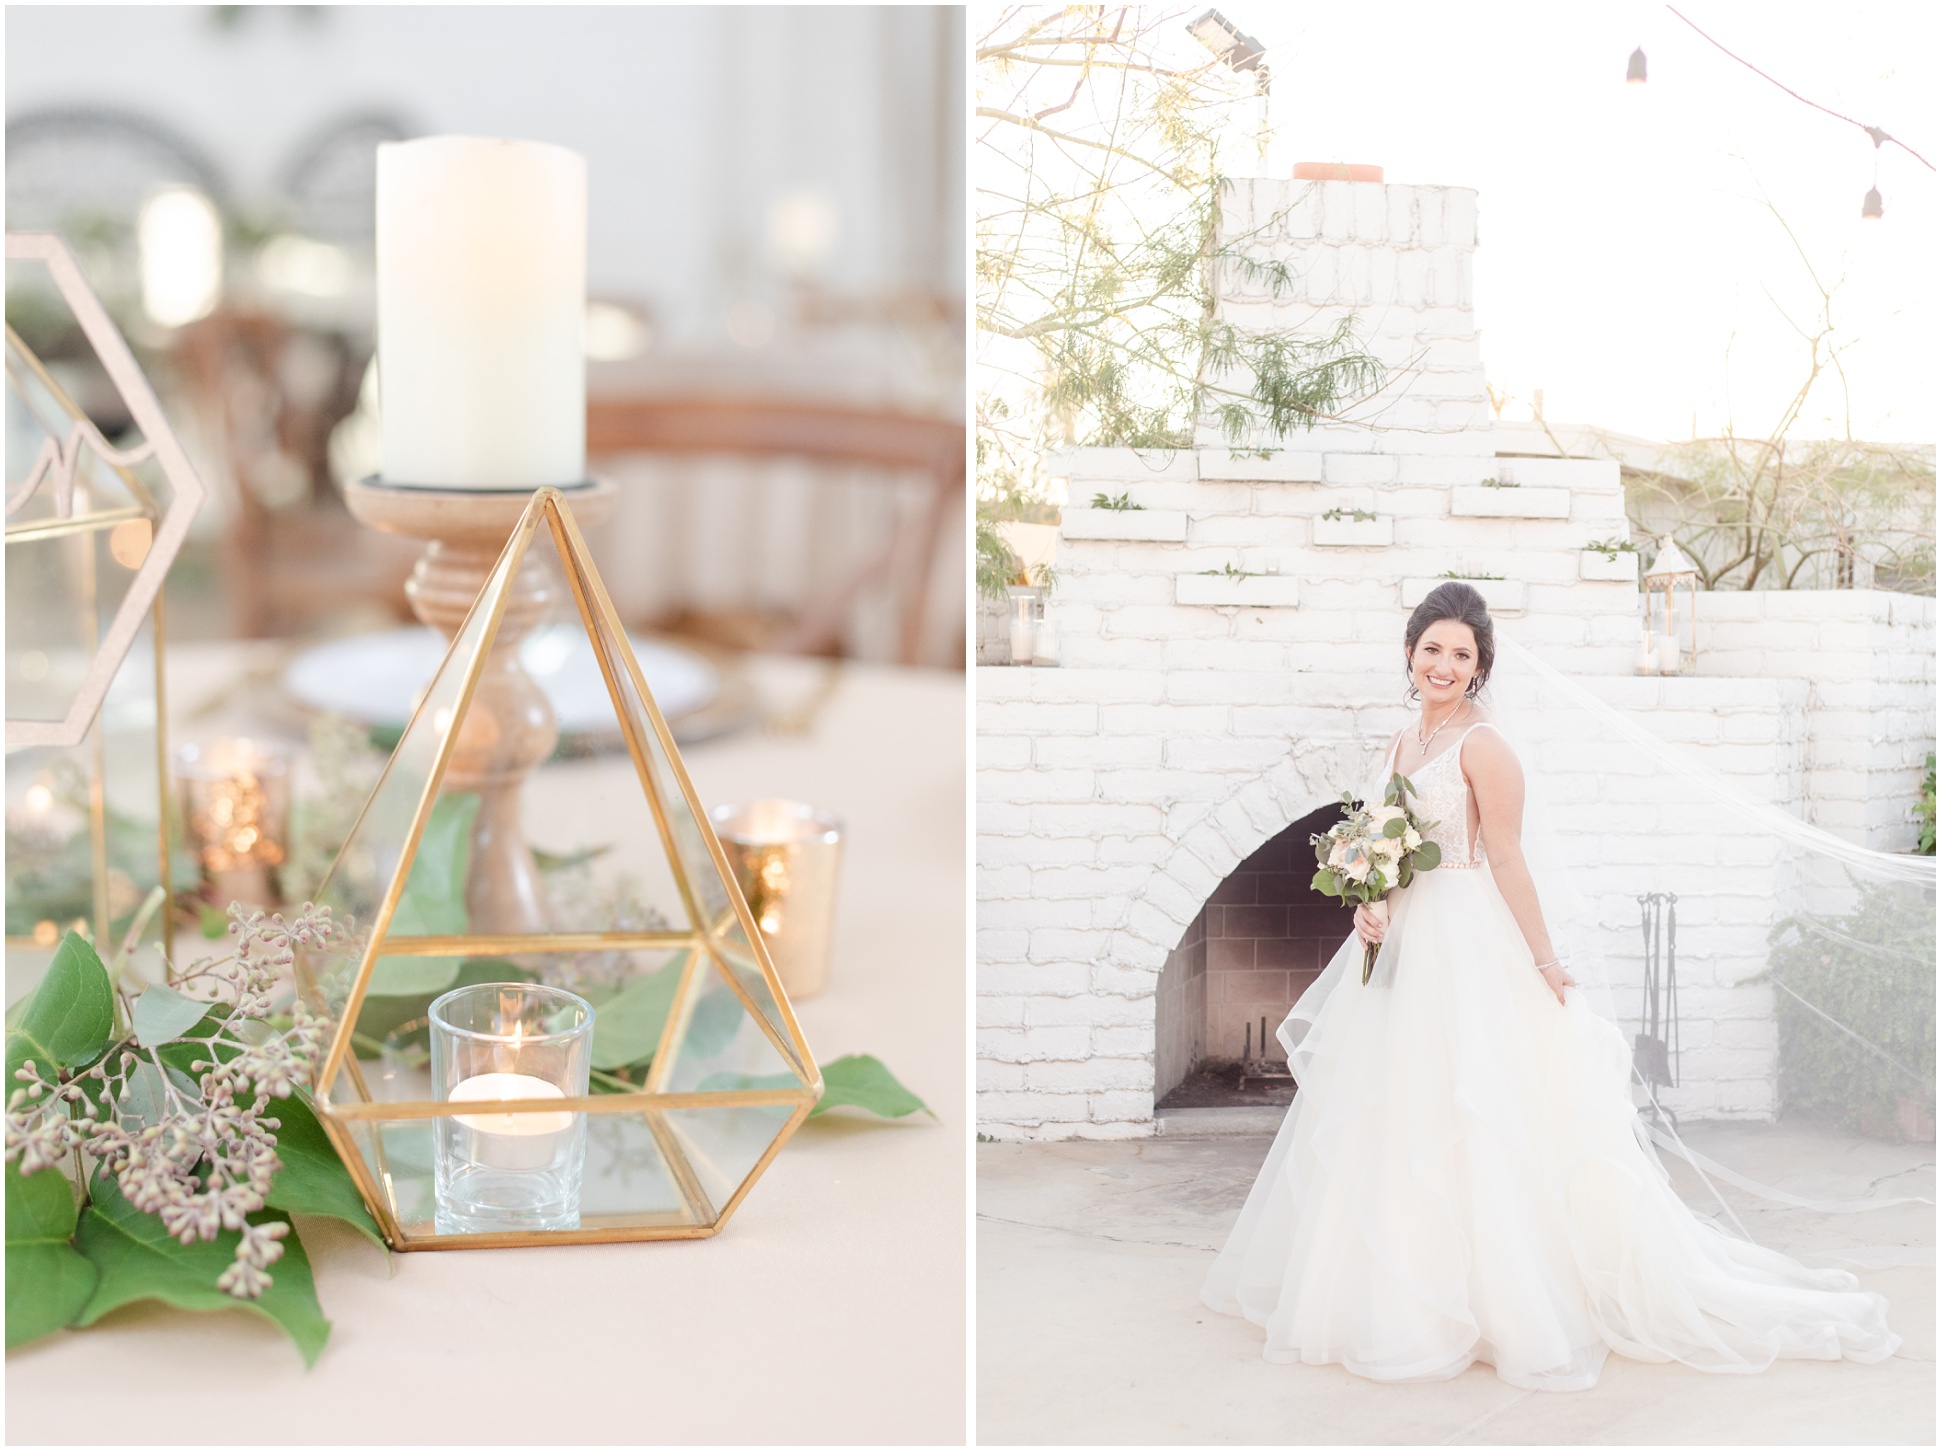 geometric table piece with candle in it, Bride smiling at camera with vail lifted up behind her